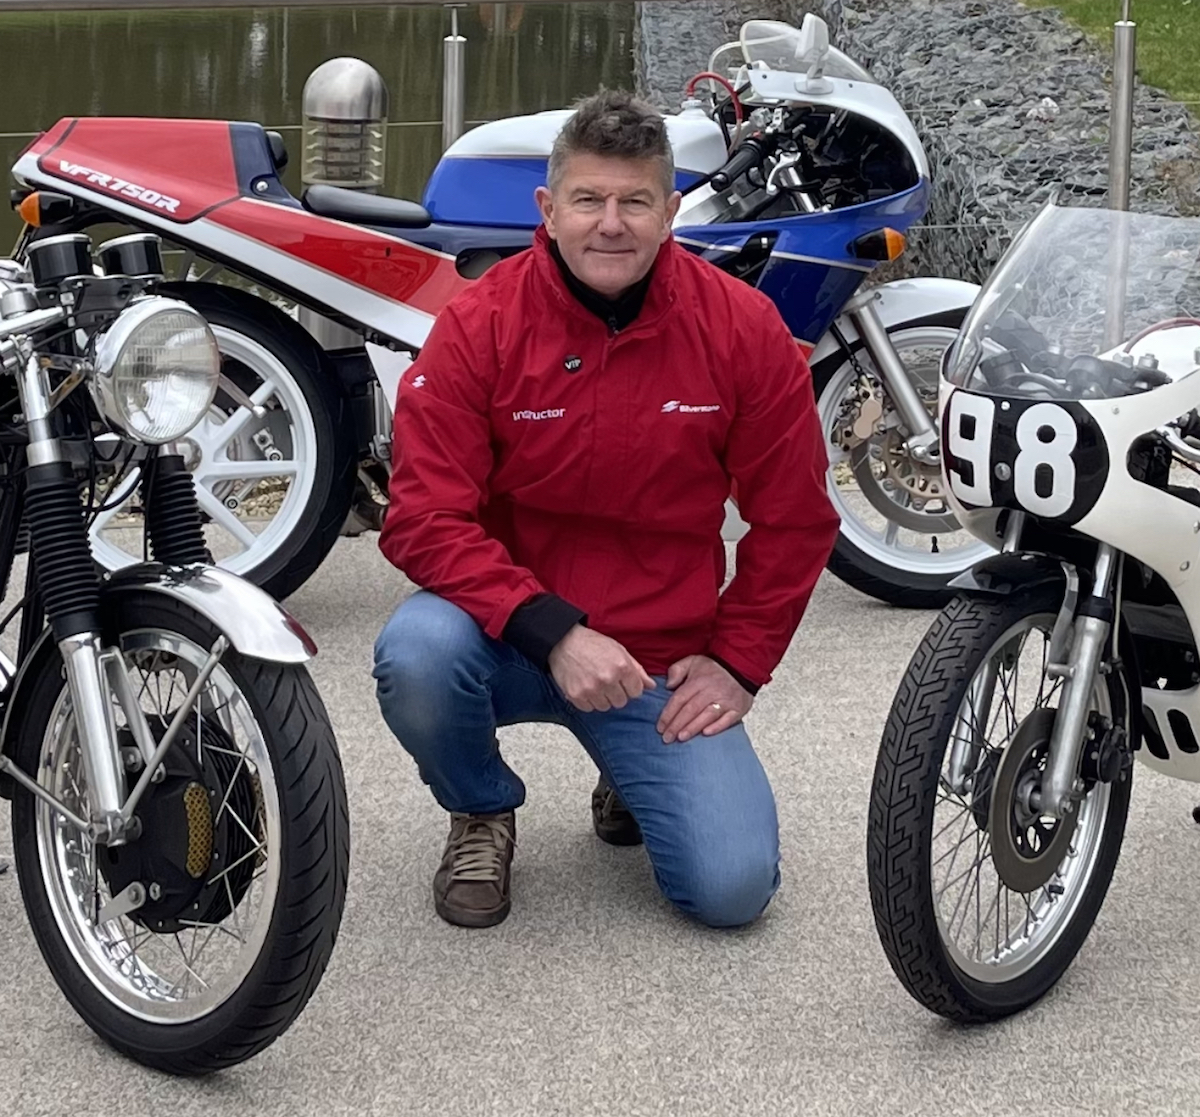 RC30 a Classic Race Bike for the Road